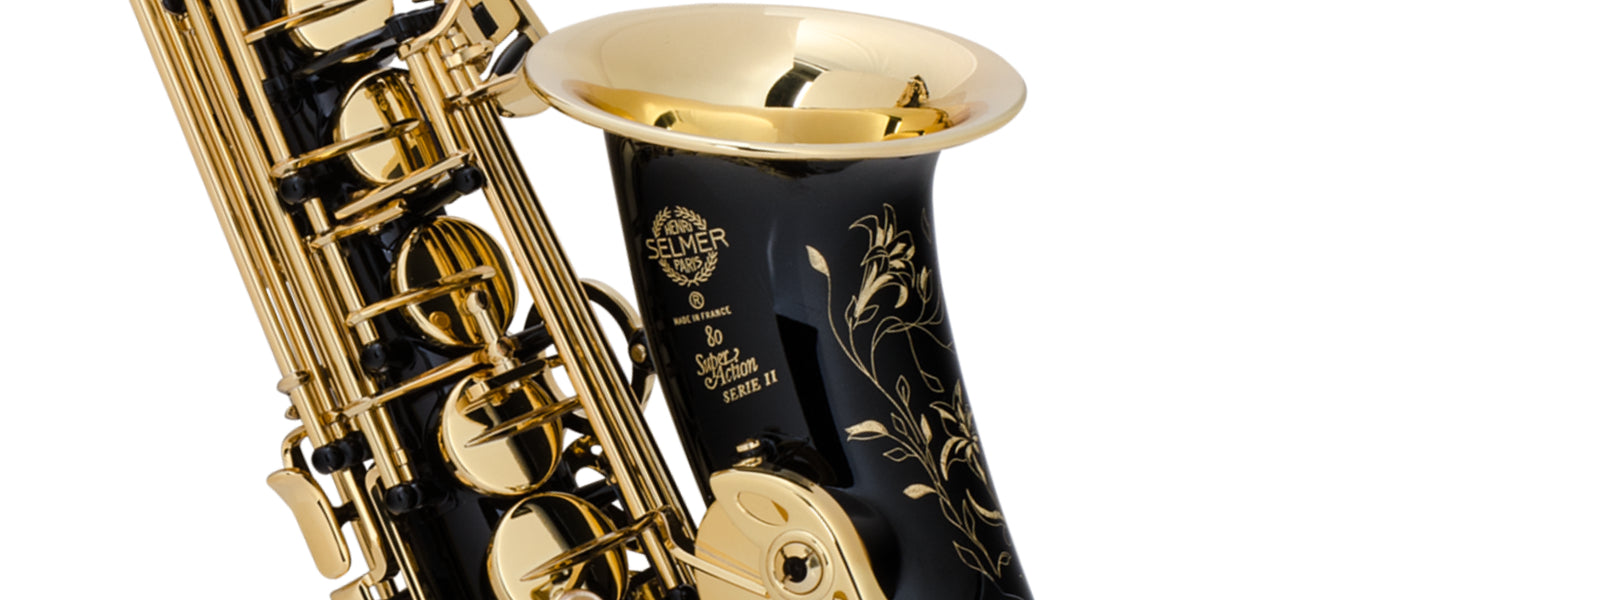 Selmer Paris saxophone in black lacquer with ornate bright brass engraving